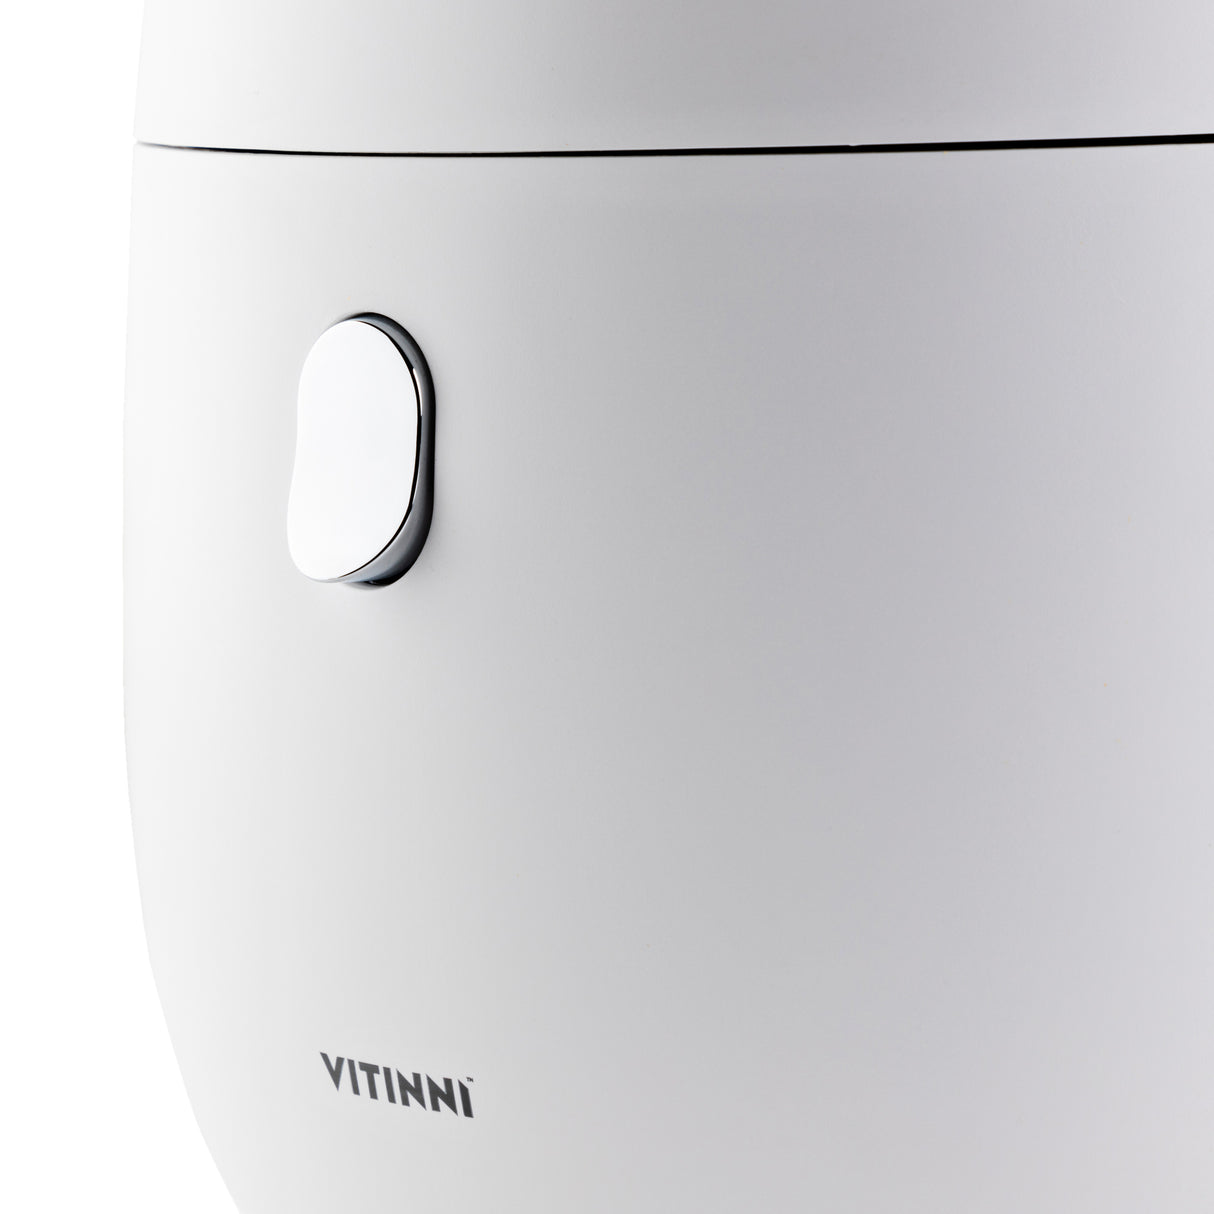 Vitinni Rice Cooker - Multi-Cooker with 1L Capacity